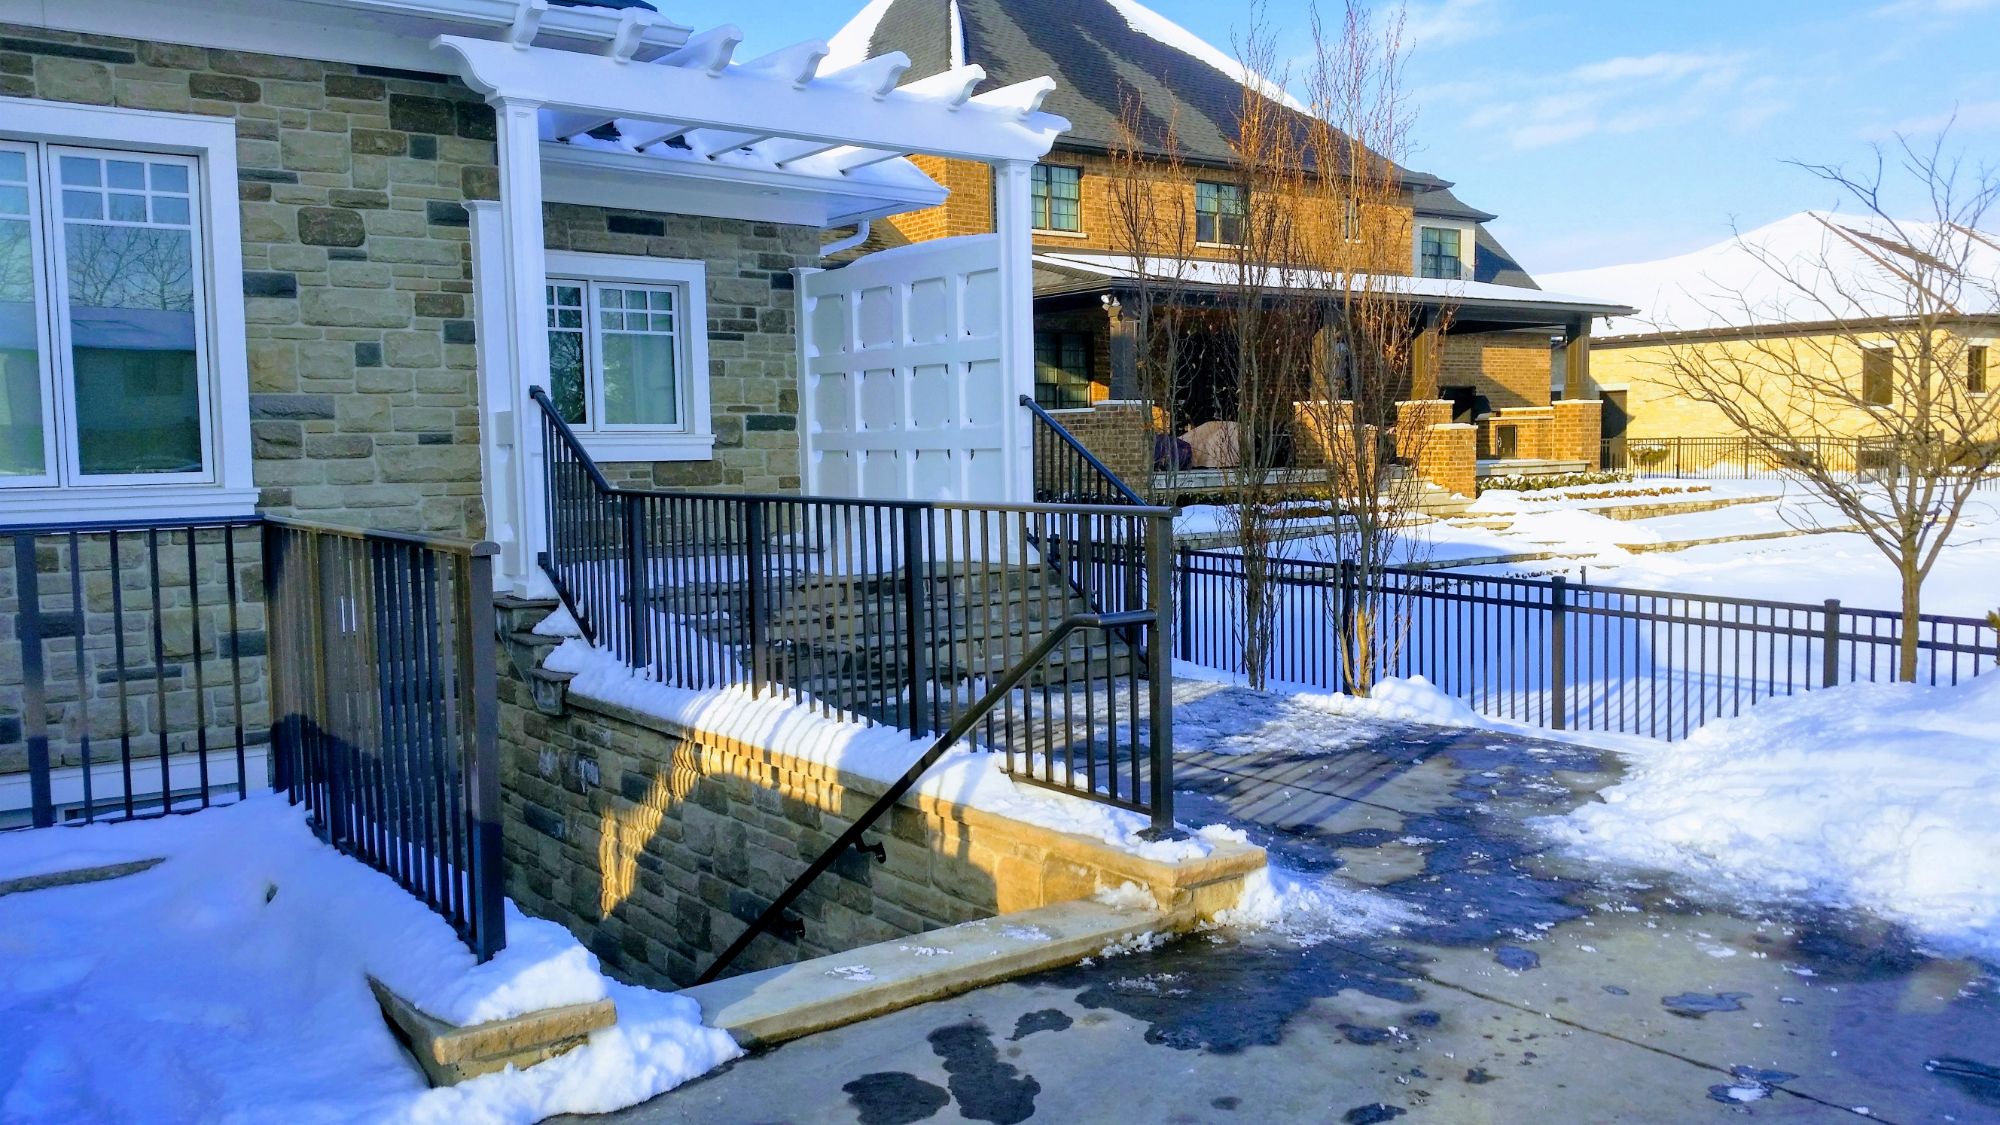 During cold winter days we installed this set of custom railings at a new build in Kingsville. Topping the angel stone, you should only install exterior railings with stainless steel anchors. To make the handrail work, we had to custom weld the grab rail to connect back into the top post. If you look int the background, admist all the snow - you can see the fence around the house